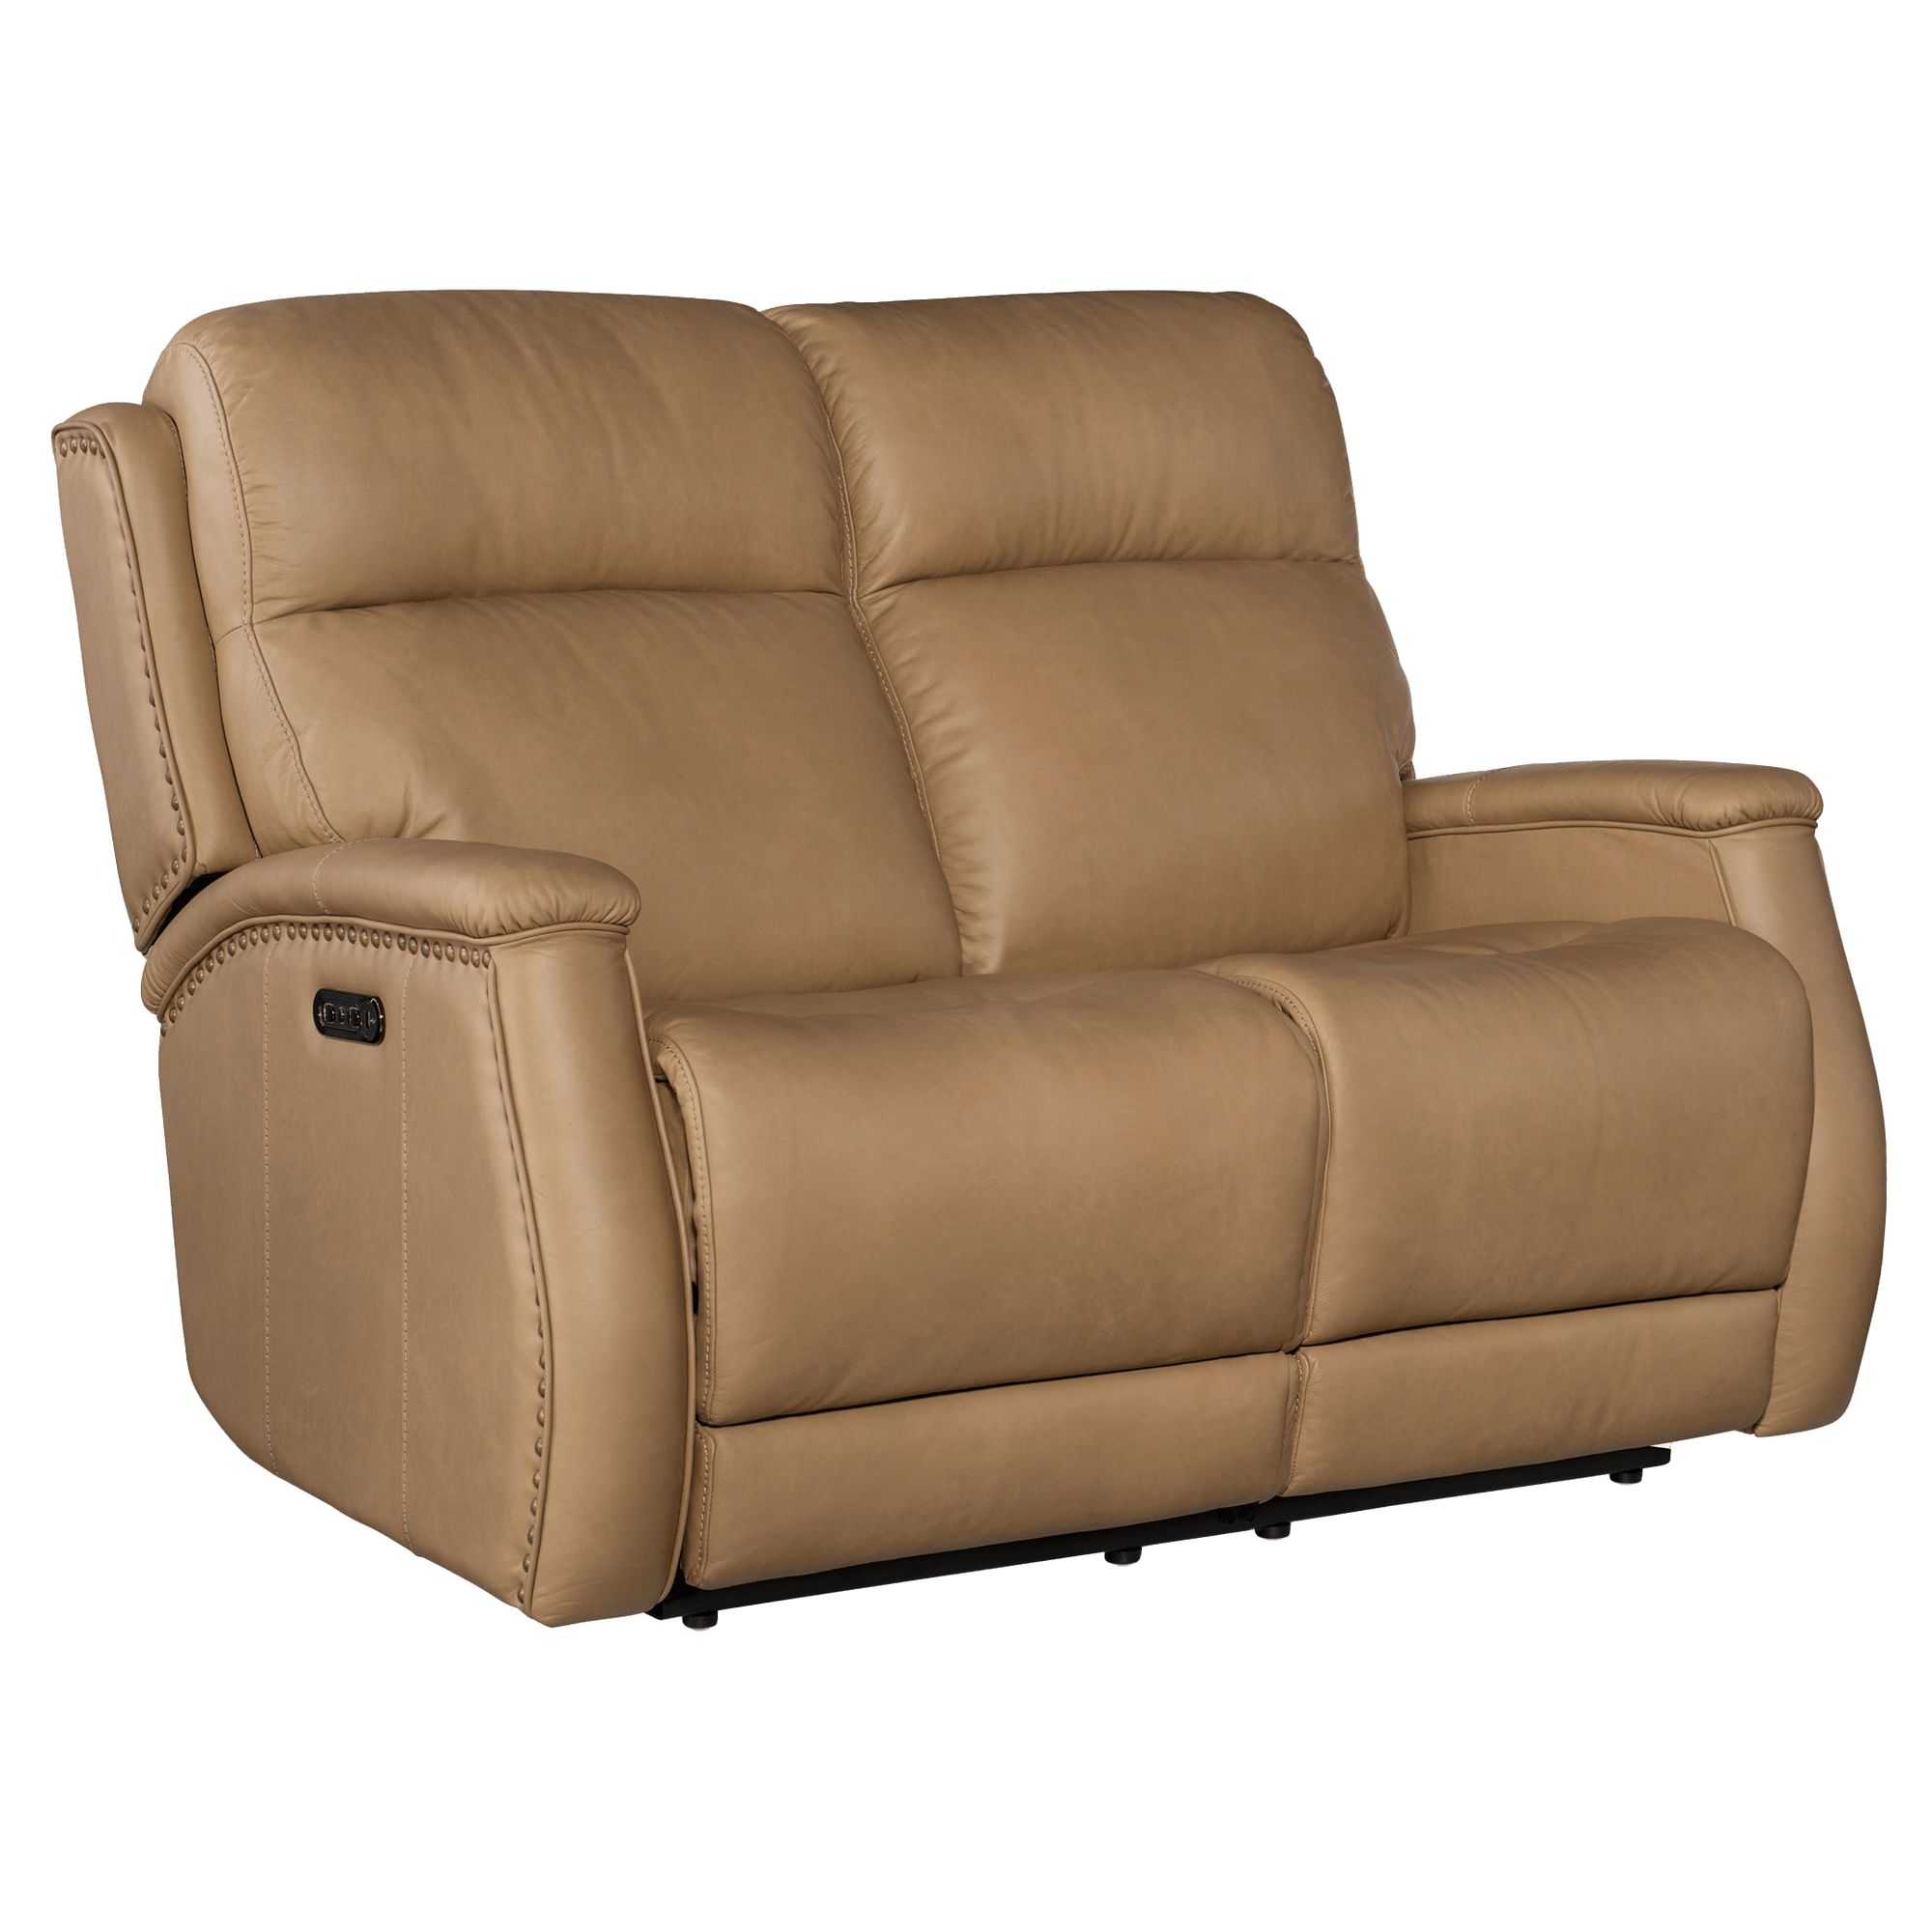 Ronica 56" Wide Upholstered Leather Loveseat